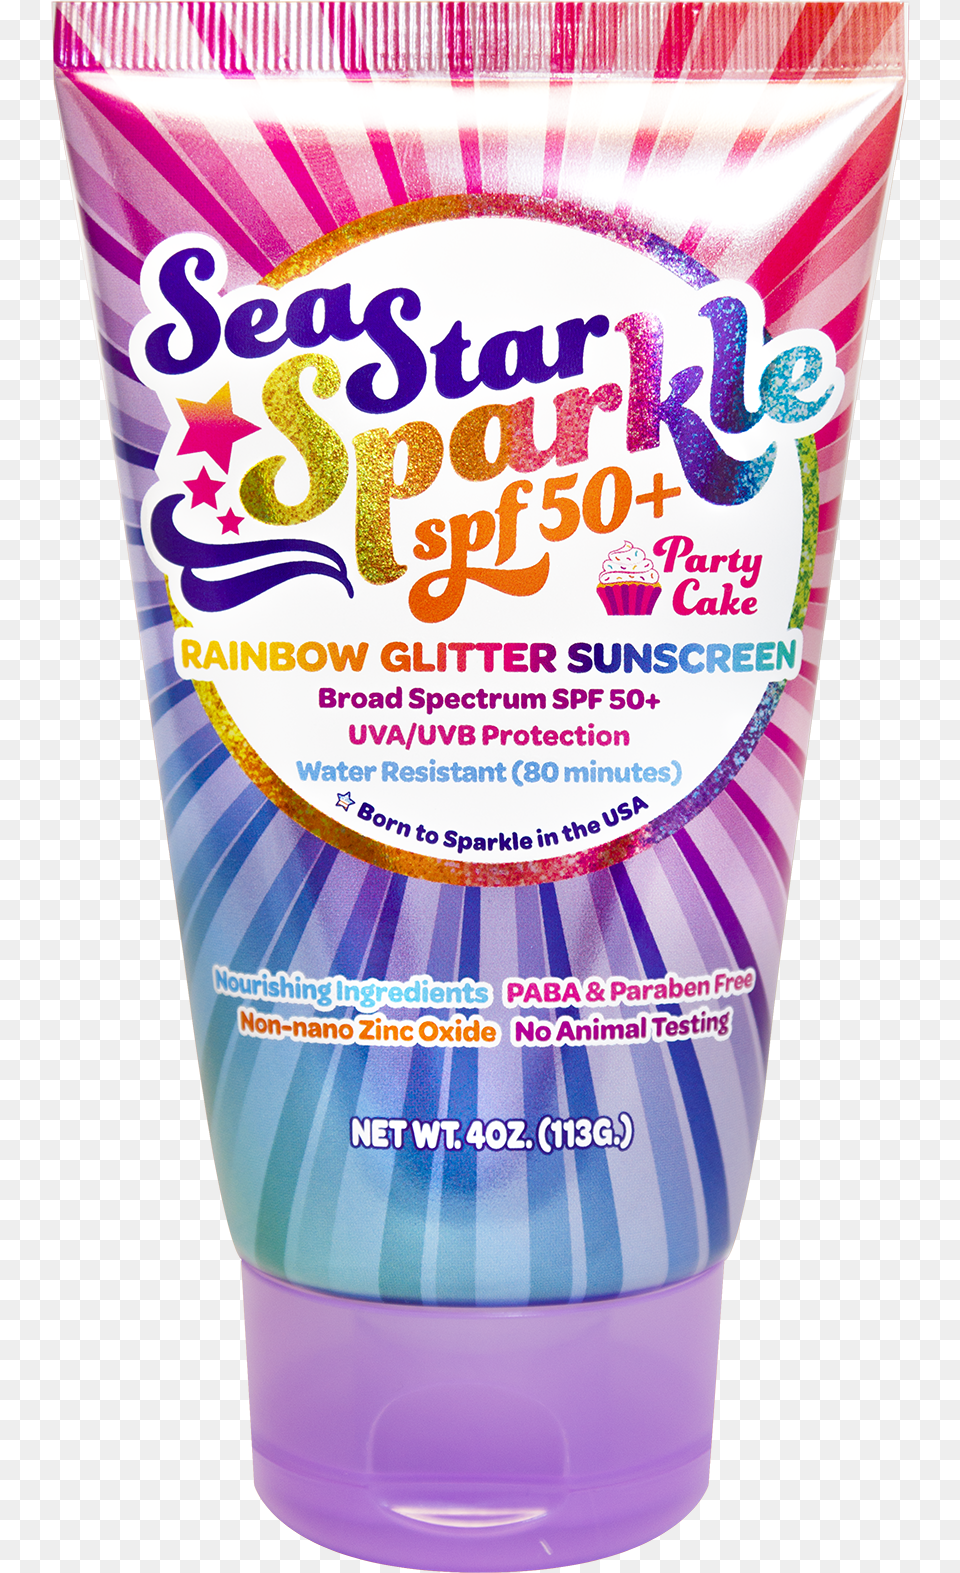 Sea Star Sparkle Spf 50 Party Cake With Rainbow Glitter Glitter Sunscreen, Bottle, Cosmetics, Can, Tin Free Png Download